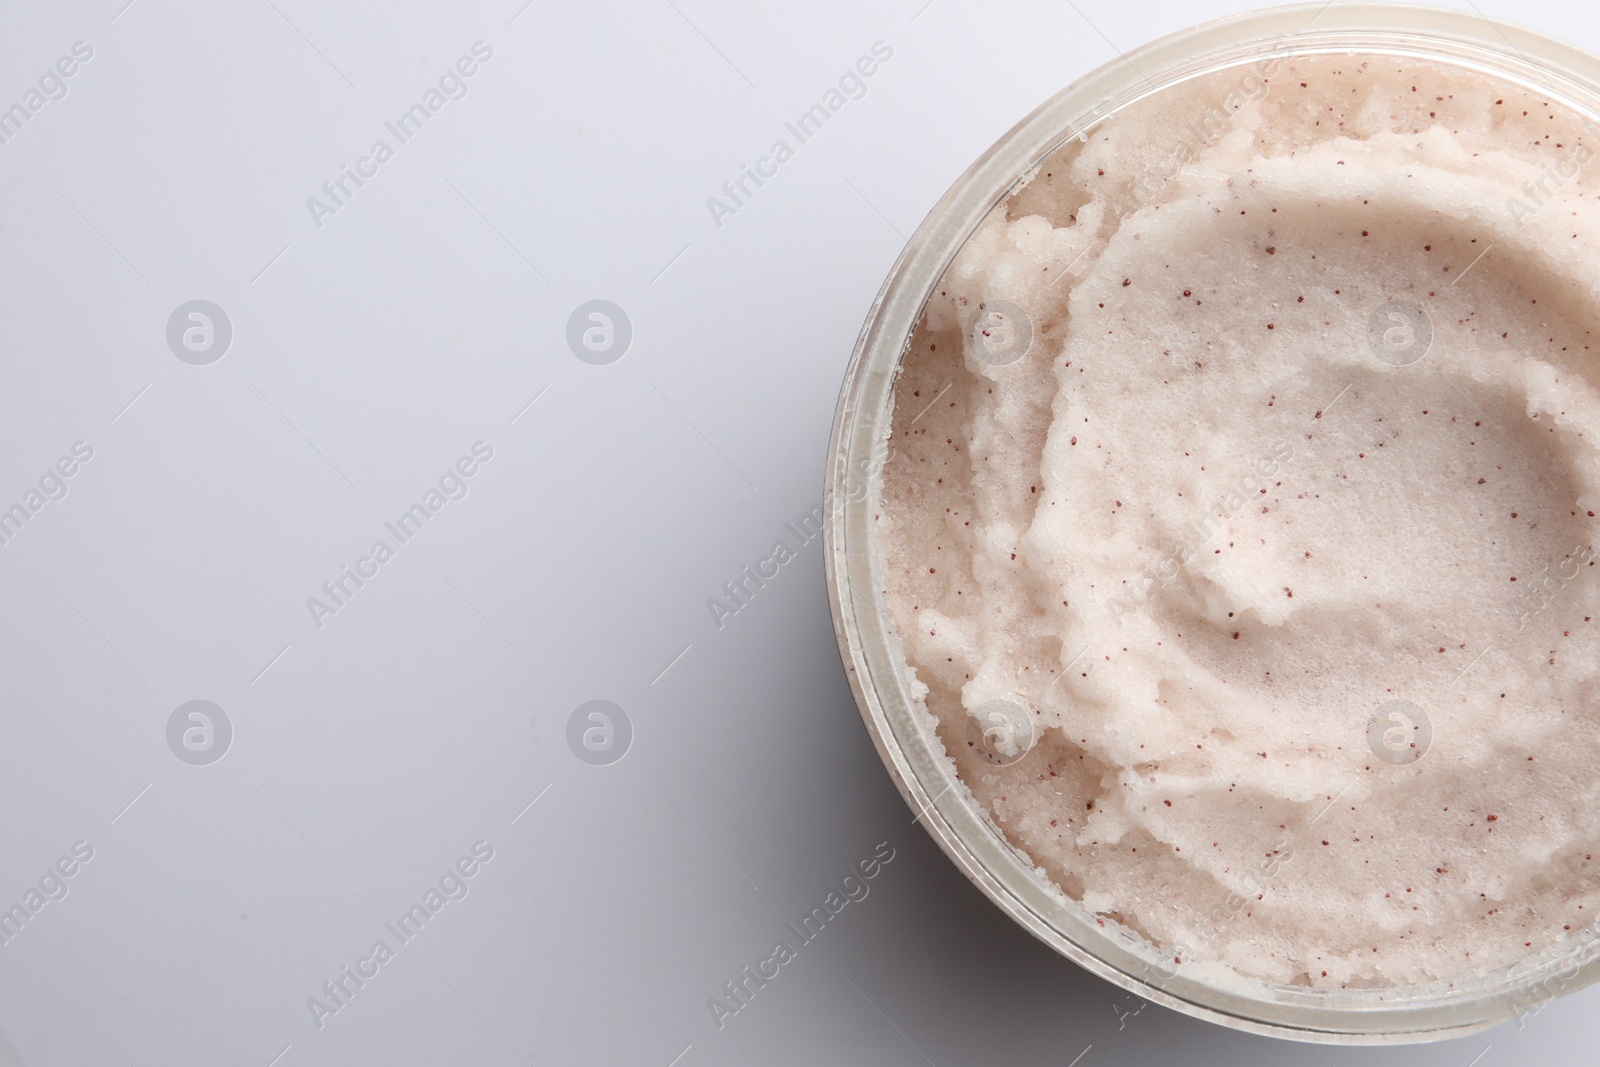 Photo of Jar of scrub on white background, top view